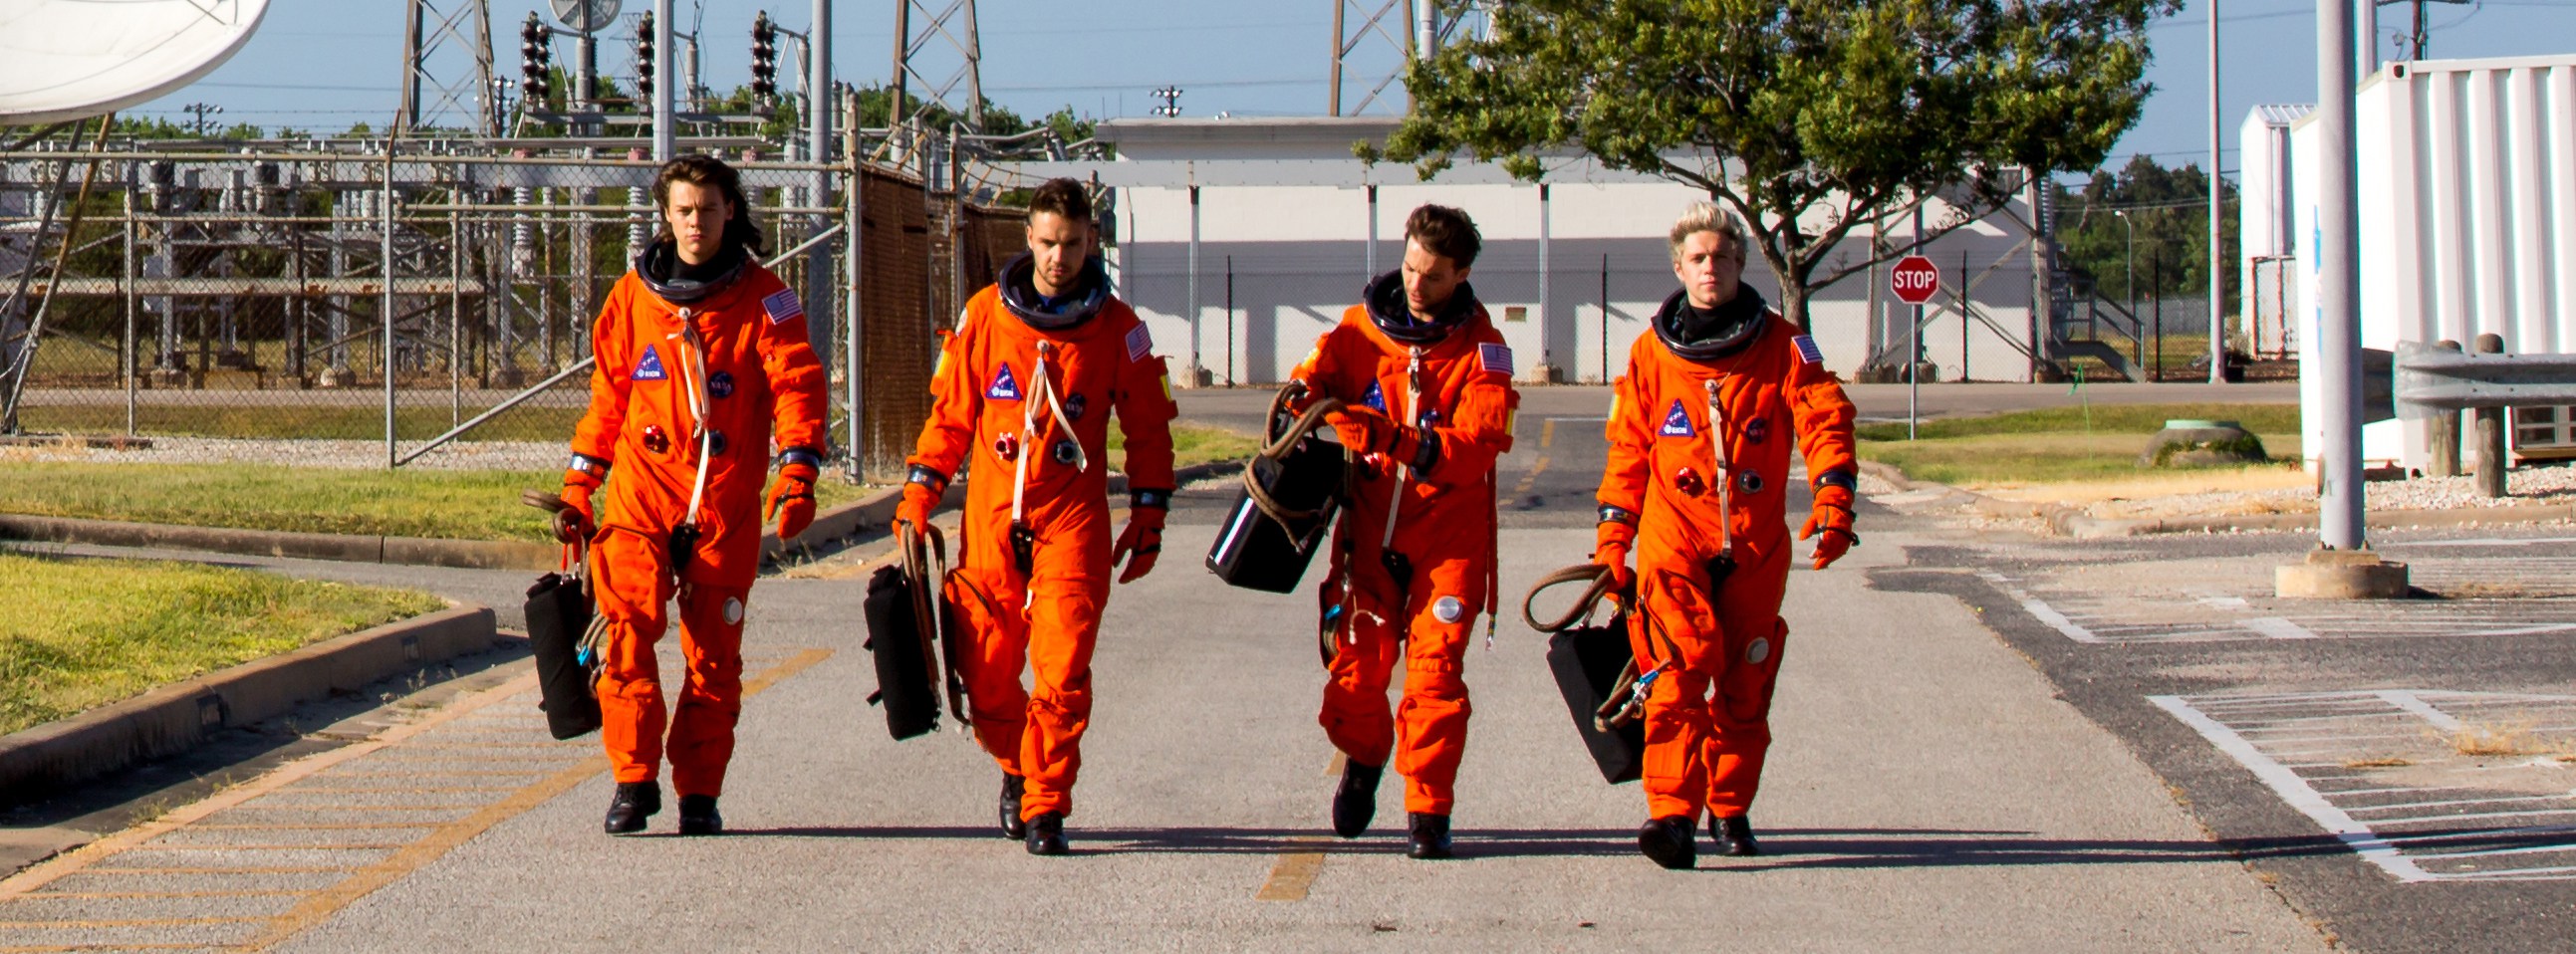 We Ve Got Some Beaut Hq Pics From 1d S Drag Me Down New